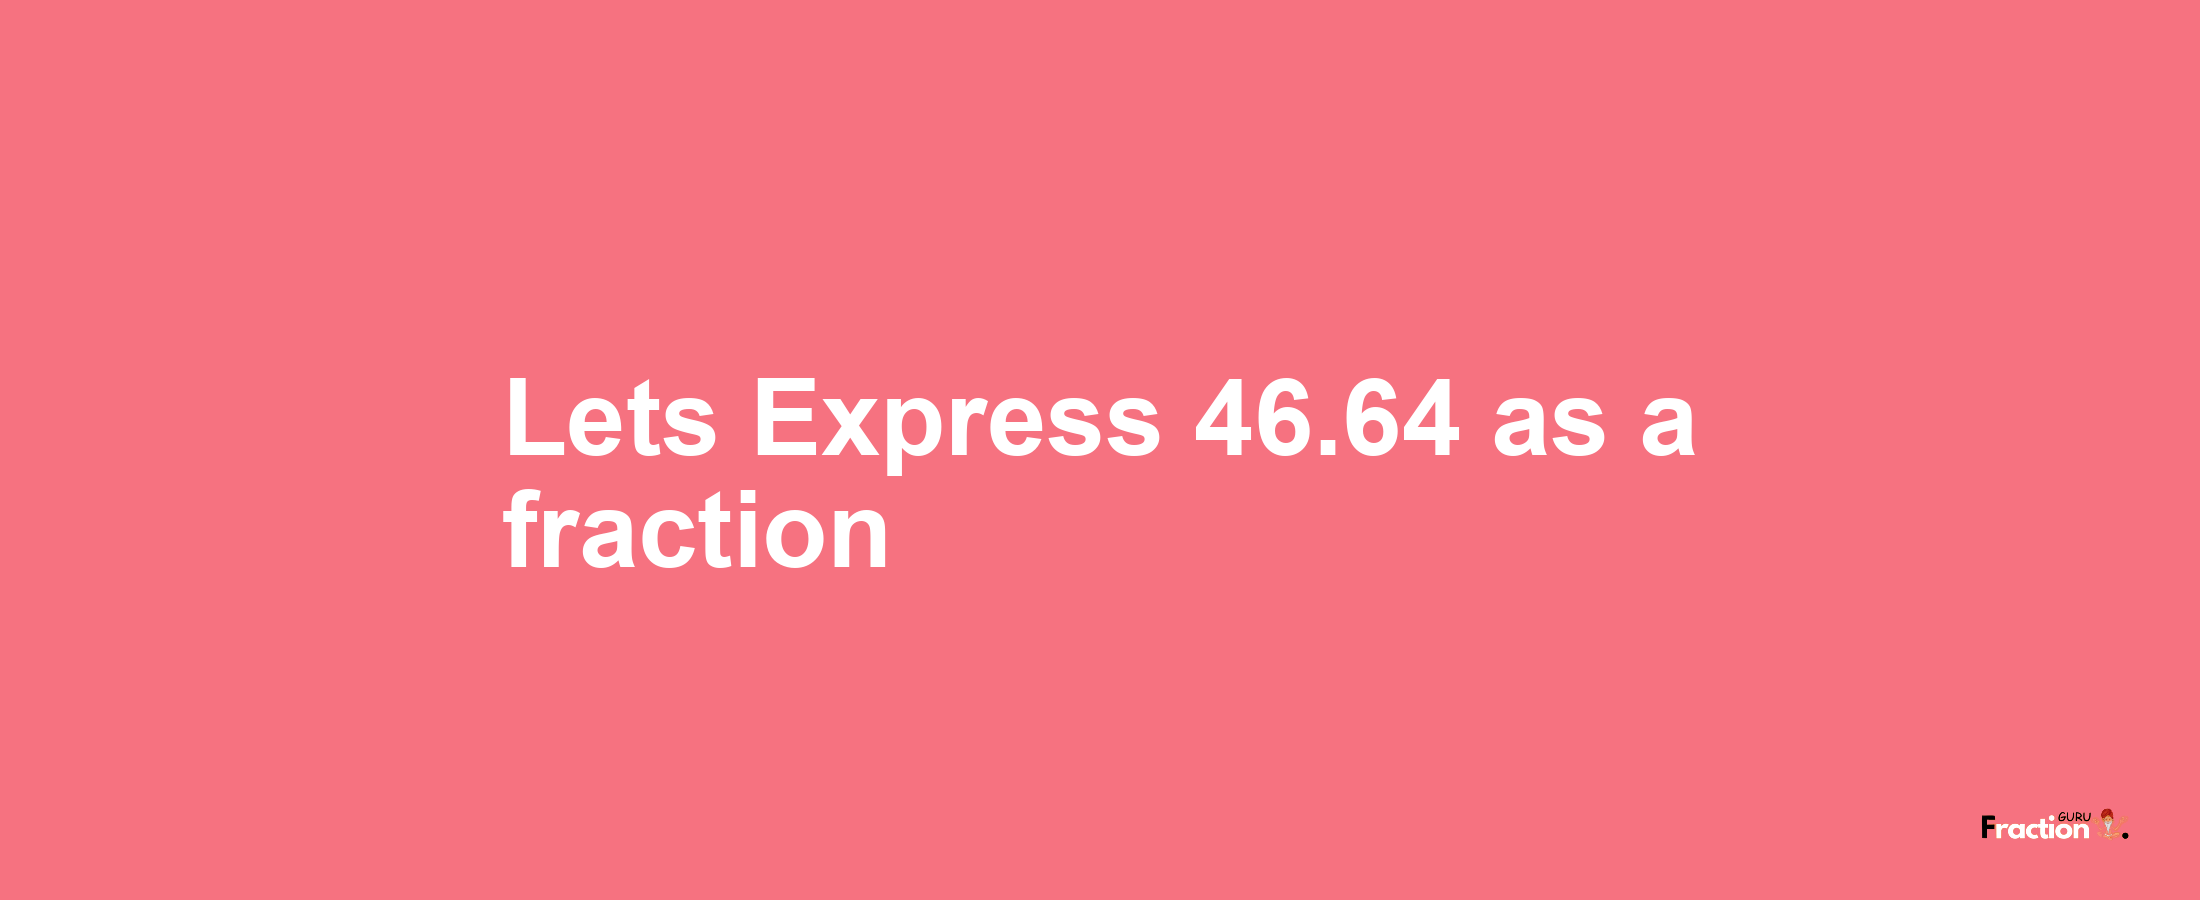 Lets Express 46.64 as afraction